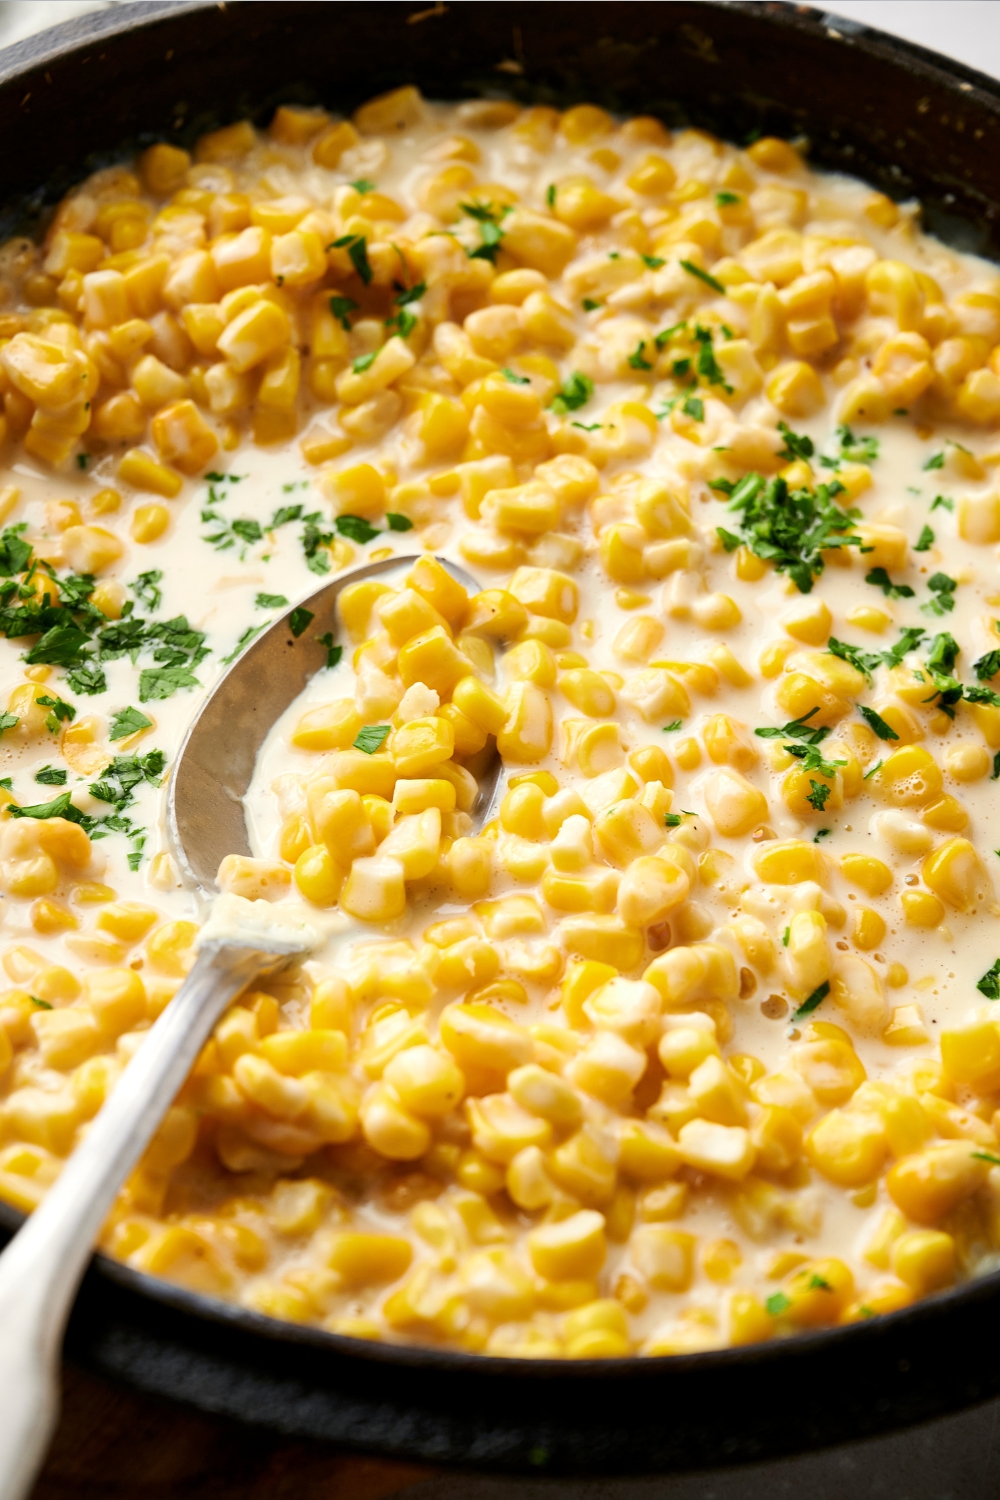 Creamed corn in a black pot with a silver spoon. The corn is garnished with fresh herbs.